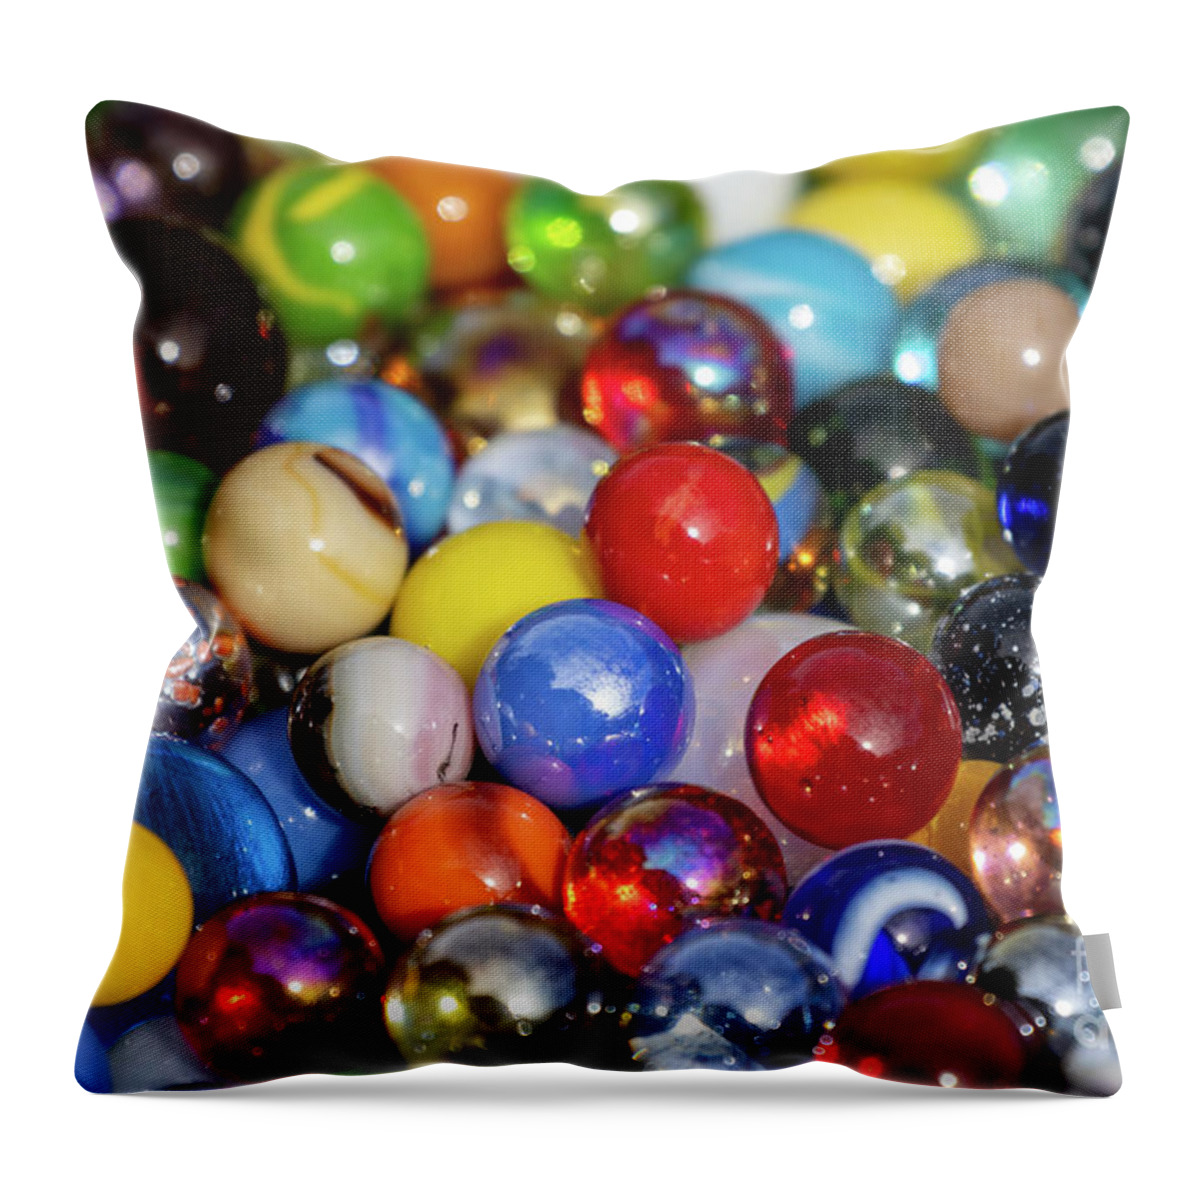 Marble Throw Pillow featuring the photograph Marbles by Vivian Krug Cotton